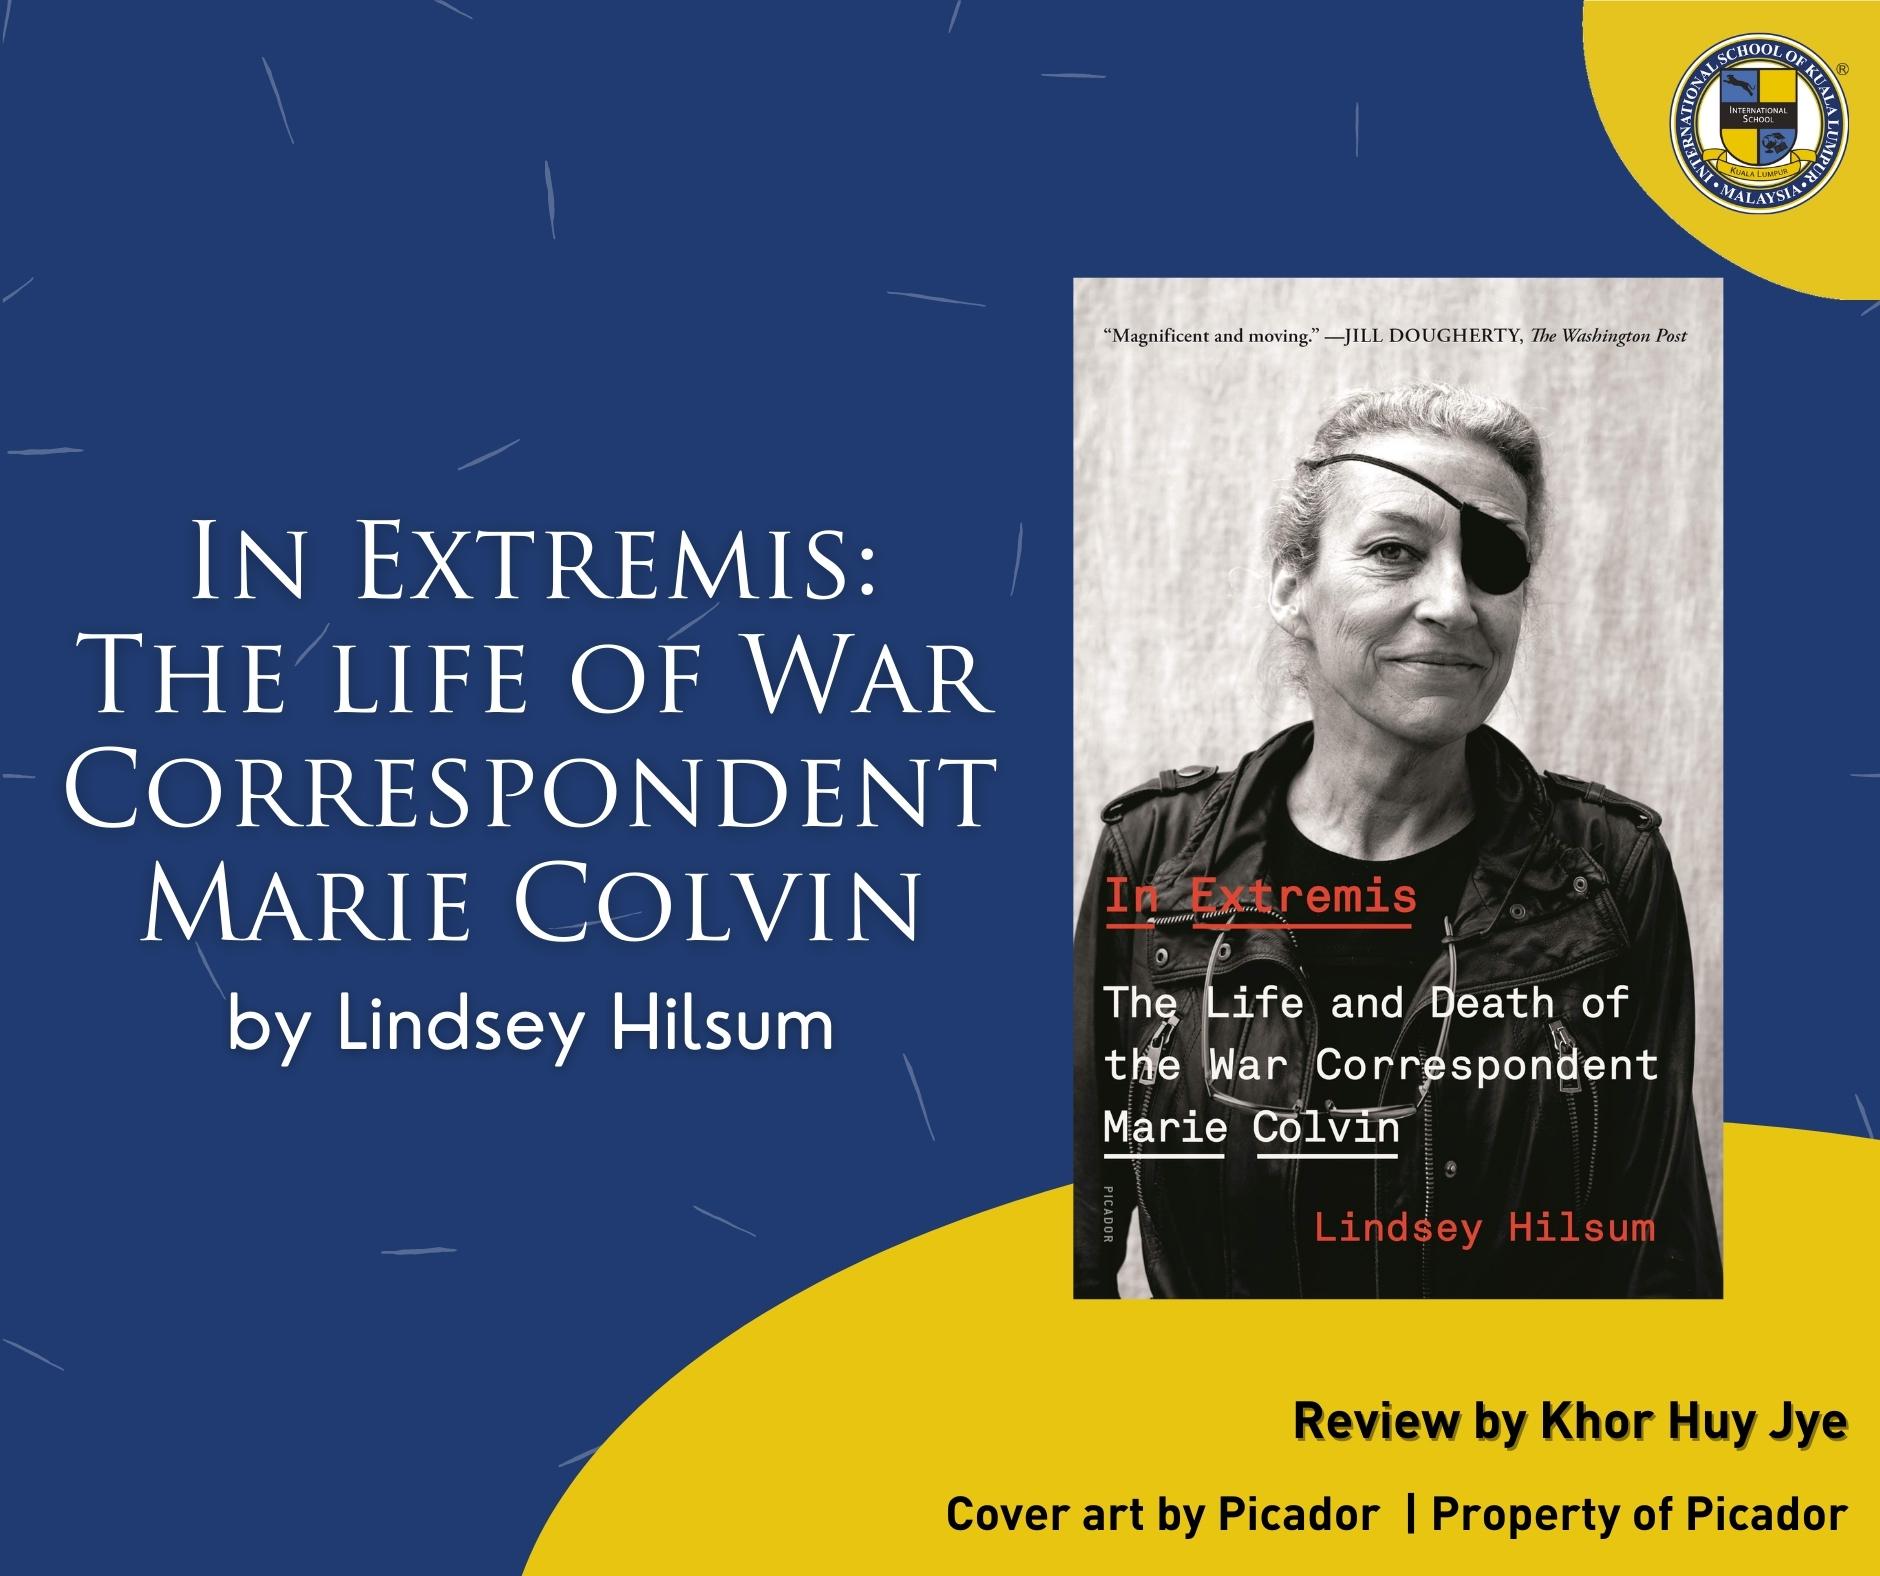 In Extremis by Lindsey Hilsum